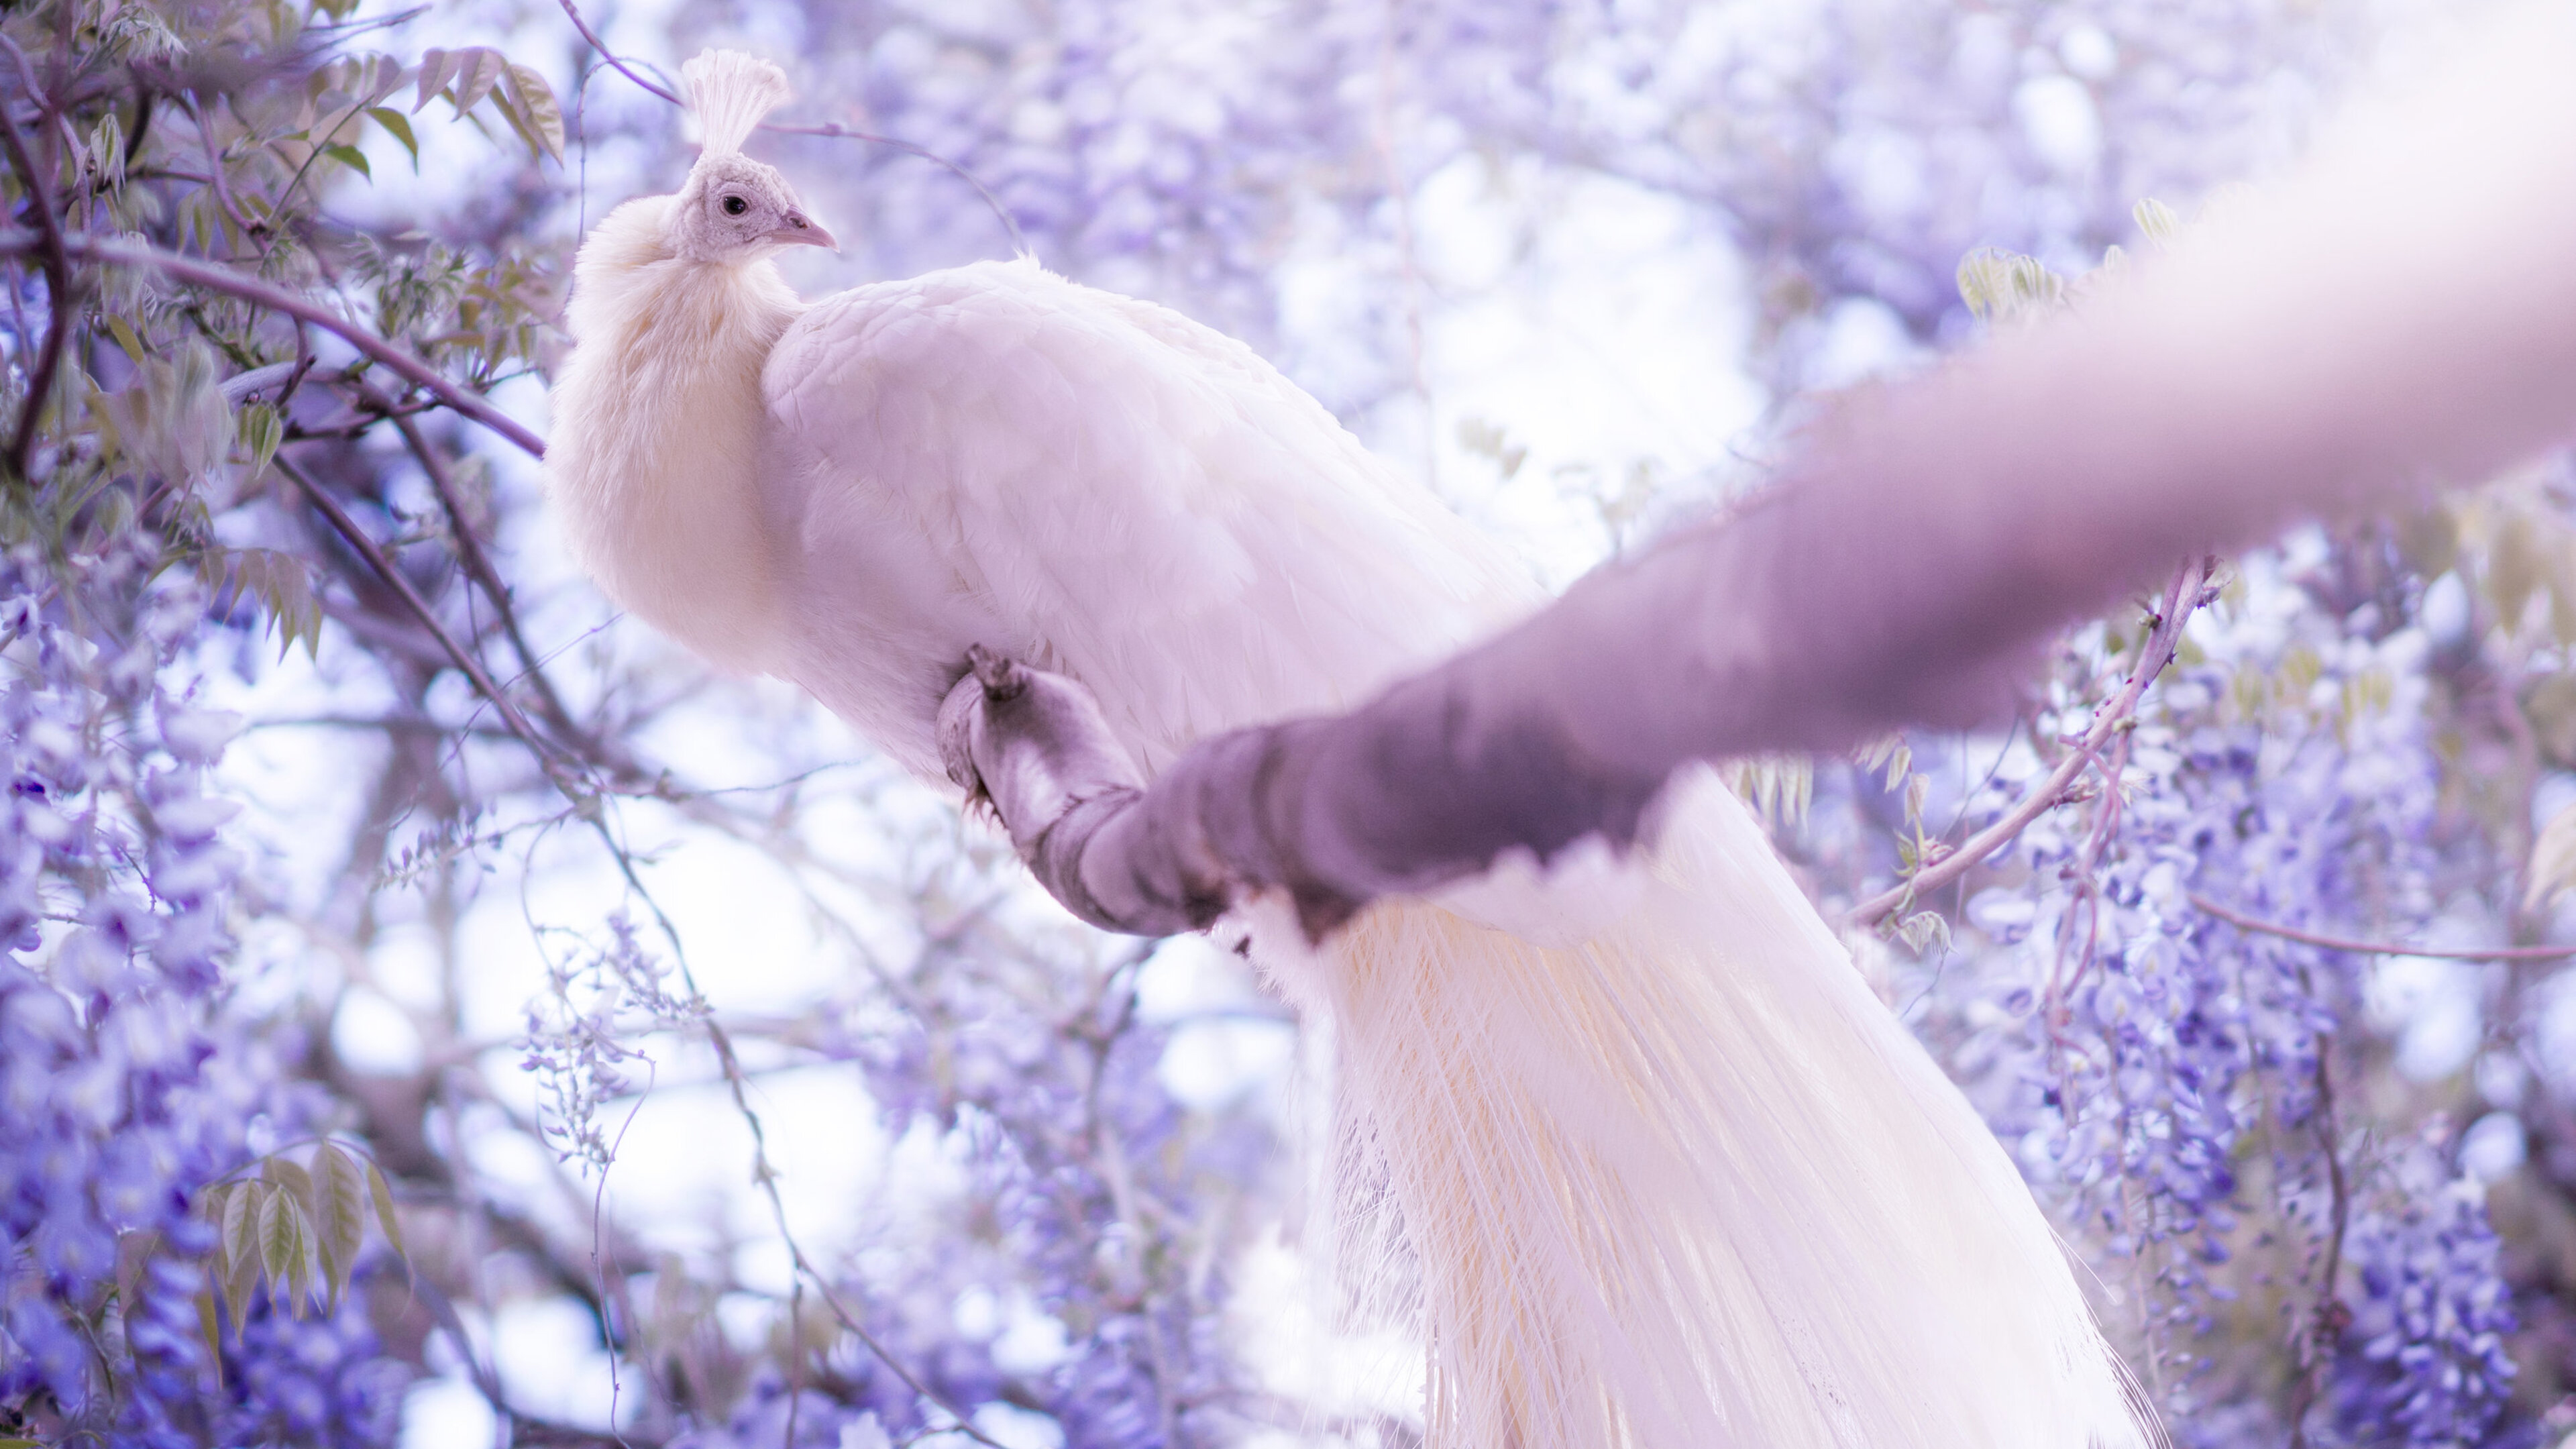 Beautiful White Peacock On Tree Branch In Blur Background 4K HD Animals Wallpapers